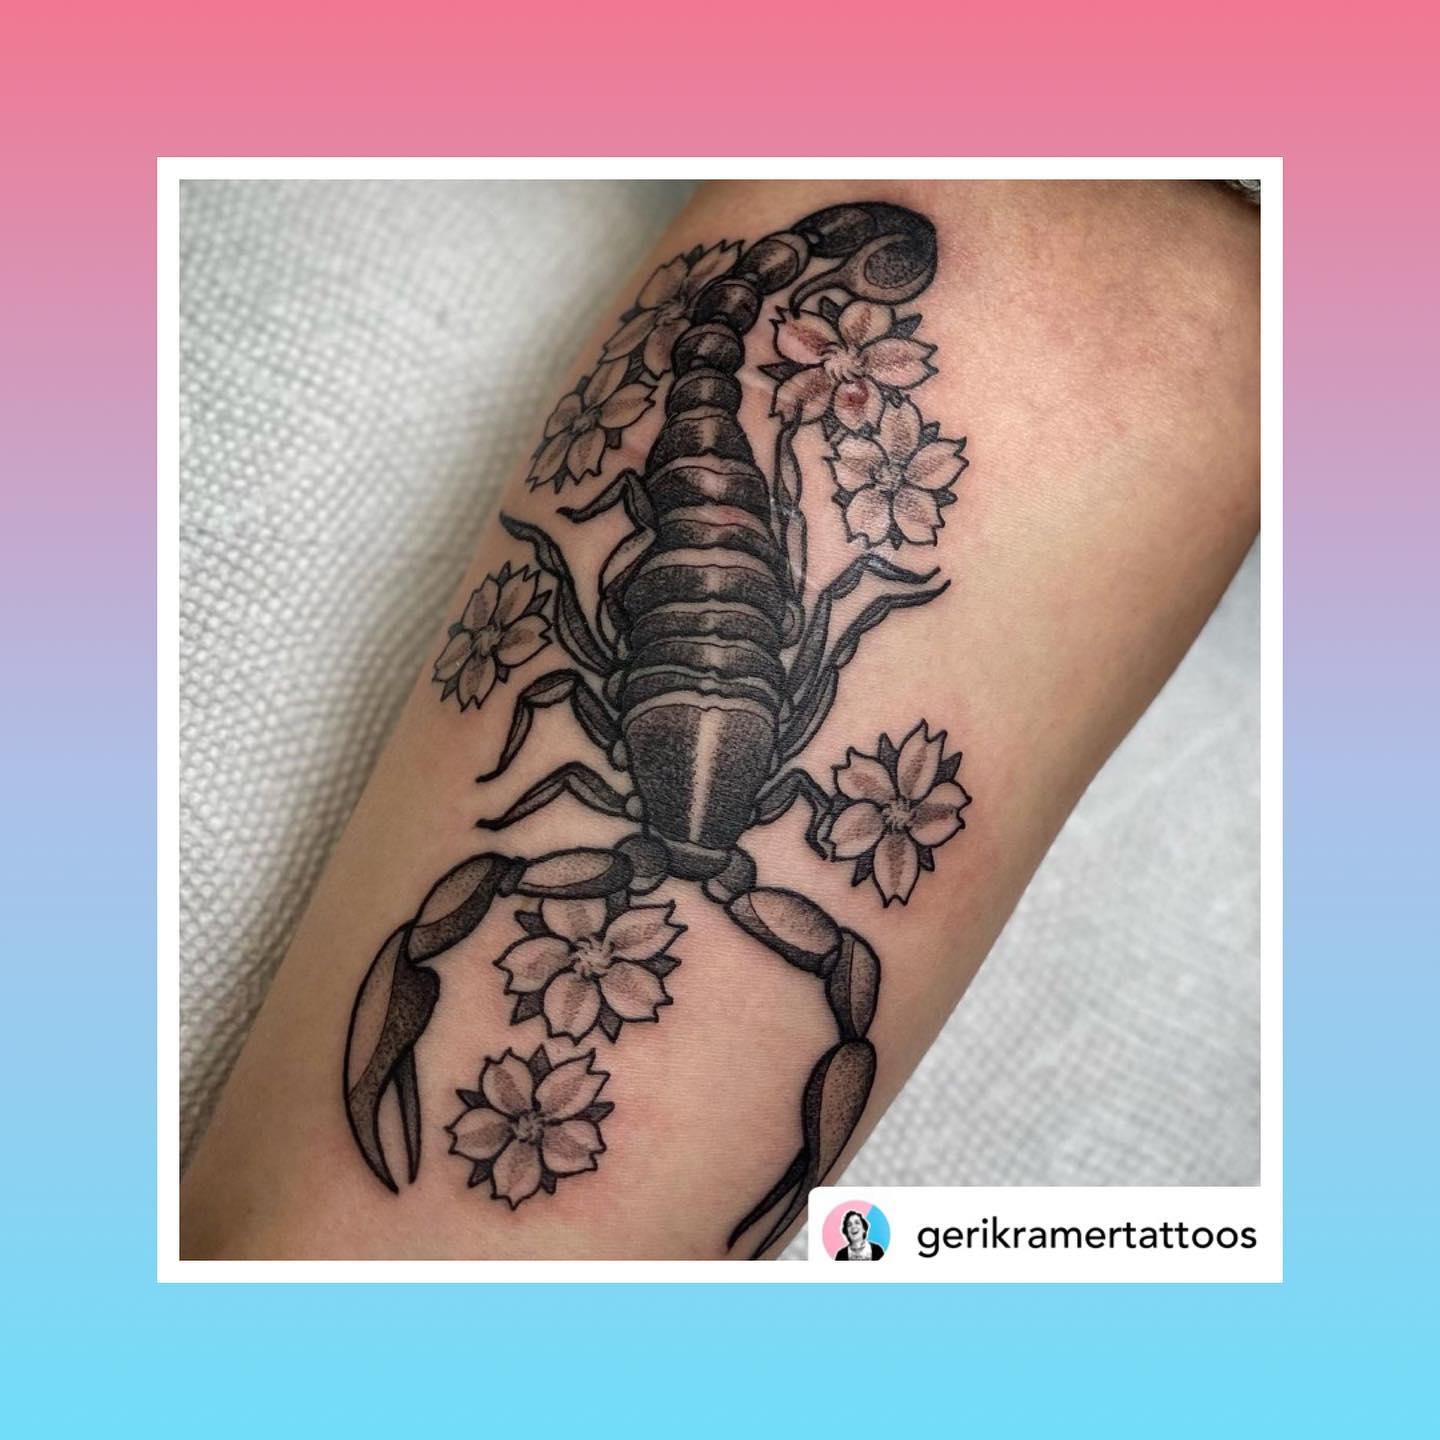 Tattoo by @gerikramertattoosAs someone born deep in the month of October (🏻) I feel a special connection with scorpions. They’re my star sign!!! How could I not?!?! 🦂 When I was 13 years old I was gifted a scorpion paperweight from a relative in Arizona. It is essentially of lump of epoxy with a dead arachnid inside, but I loved it and I kept it. Oh, how I kept it.That lump of epoxy has made every move I did, has seen every relationship - spent every minute of its existence in my possession.And I still have it! It sits on a display shelf in my bedroom, watching over me while I sleep.So while I’m terribly afraid of spiders - to the point of paralysis when I see them unexpectedly - not my sweet baby epoxy scorp. I love that little guy with my whole heart.Making this tattoo had us connecting over our shared love of our paperweights (yes - they had one also!!) and I wouldn’t have it any other way. This predrawn design from my up-for-grabs highlight found exactly the right person, and I’m so glad I got to be a part of it. ️***********My books will be reopening mid July. Be sure to sign up for my mailing list so you don’t miss it! Link in my bio. 🥰........#TransTattooer #TransTattooArtist#TransTattooArtists #Transgender #Trans #Transtttism #QueerTattooer #TransWoman #QueerTattooArtist #QueerArtist #qttr #LadyTattooer #VictoriaTattooer #VictoriaTattooArtist#VictoriaBC #WeLoveTattooingYou #TattooZoo